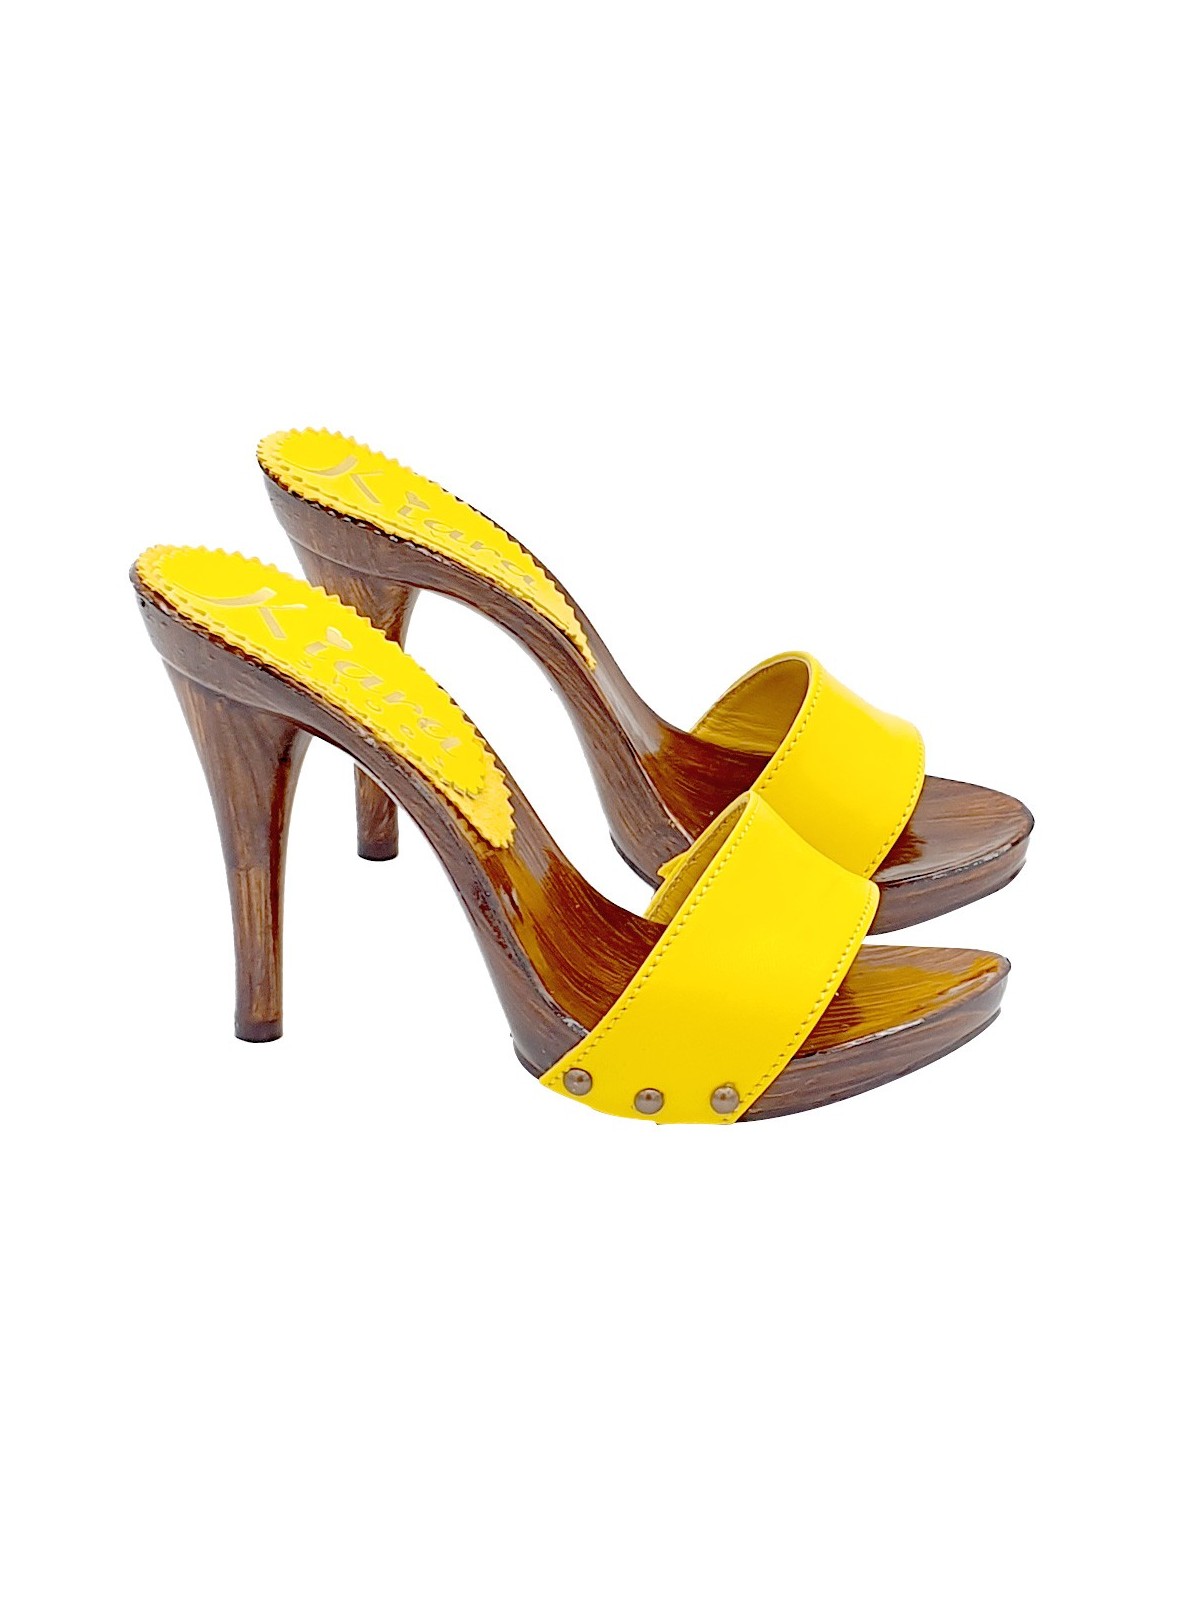 YELLOW CLOGS WITH LEATHER BAND AND HIGH HEEL